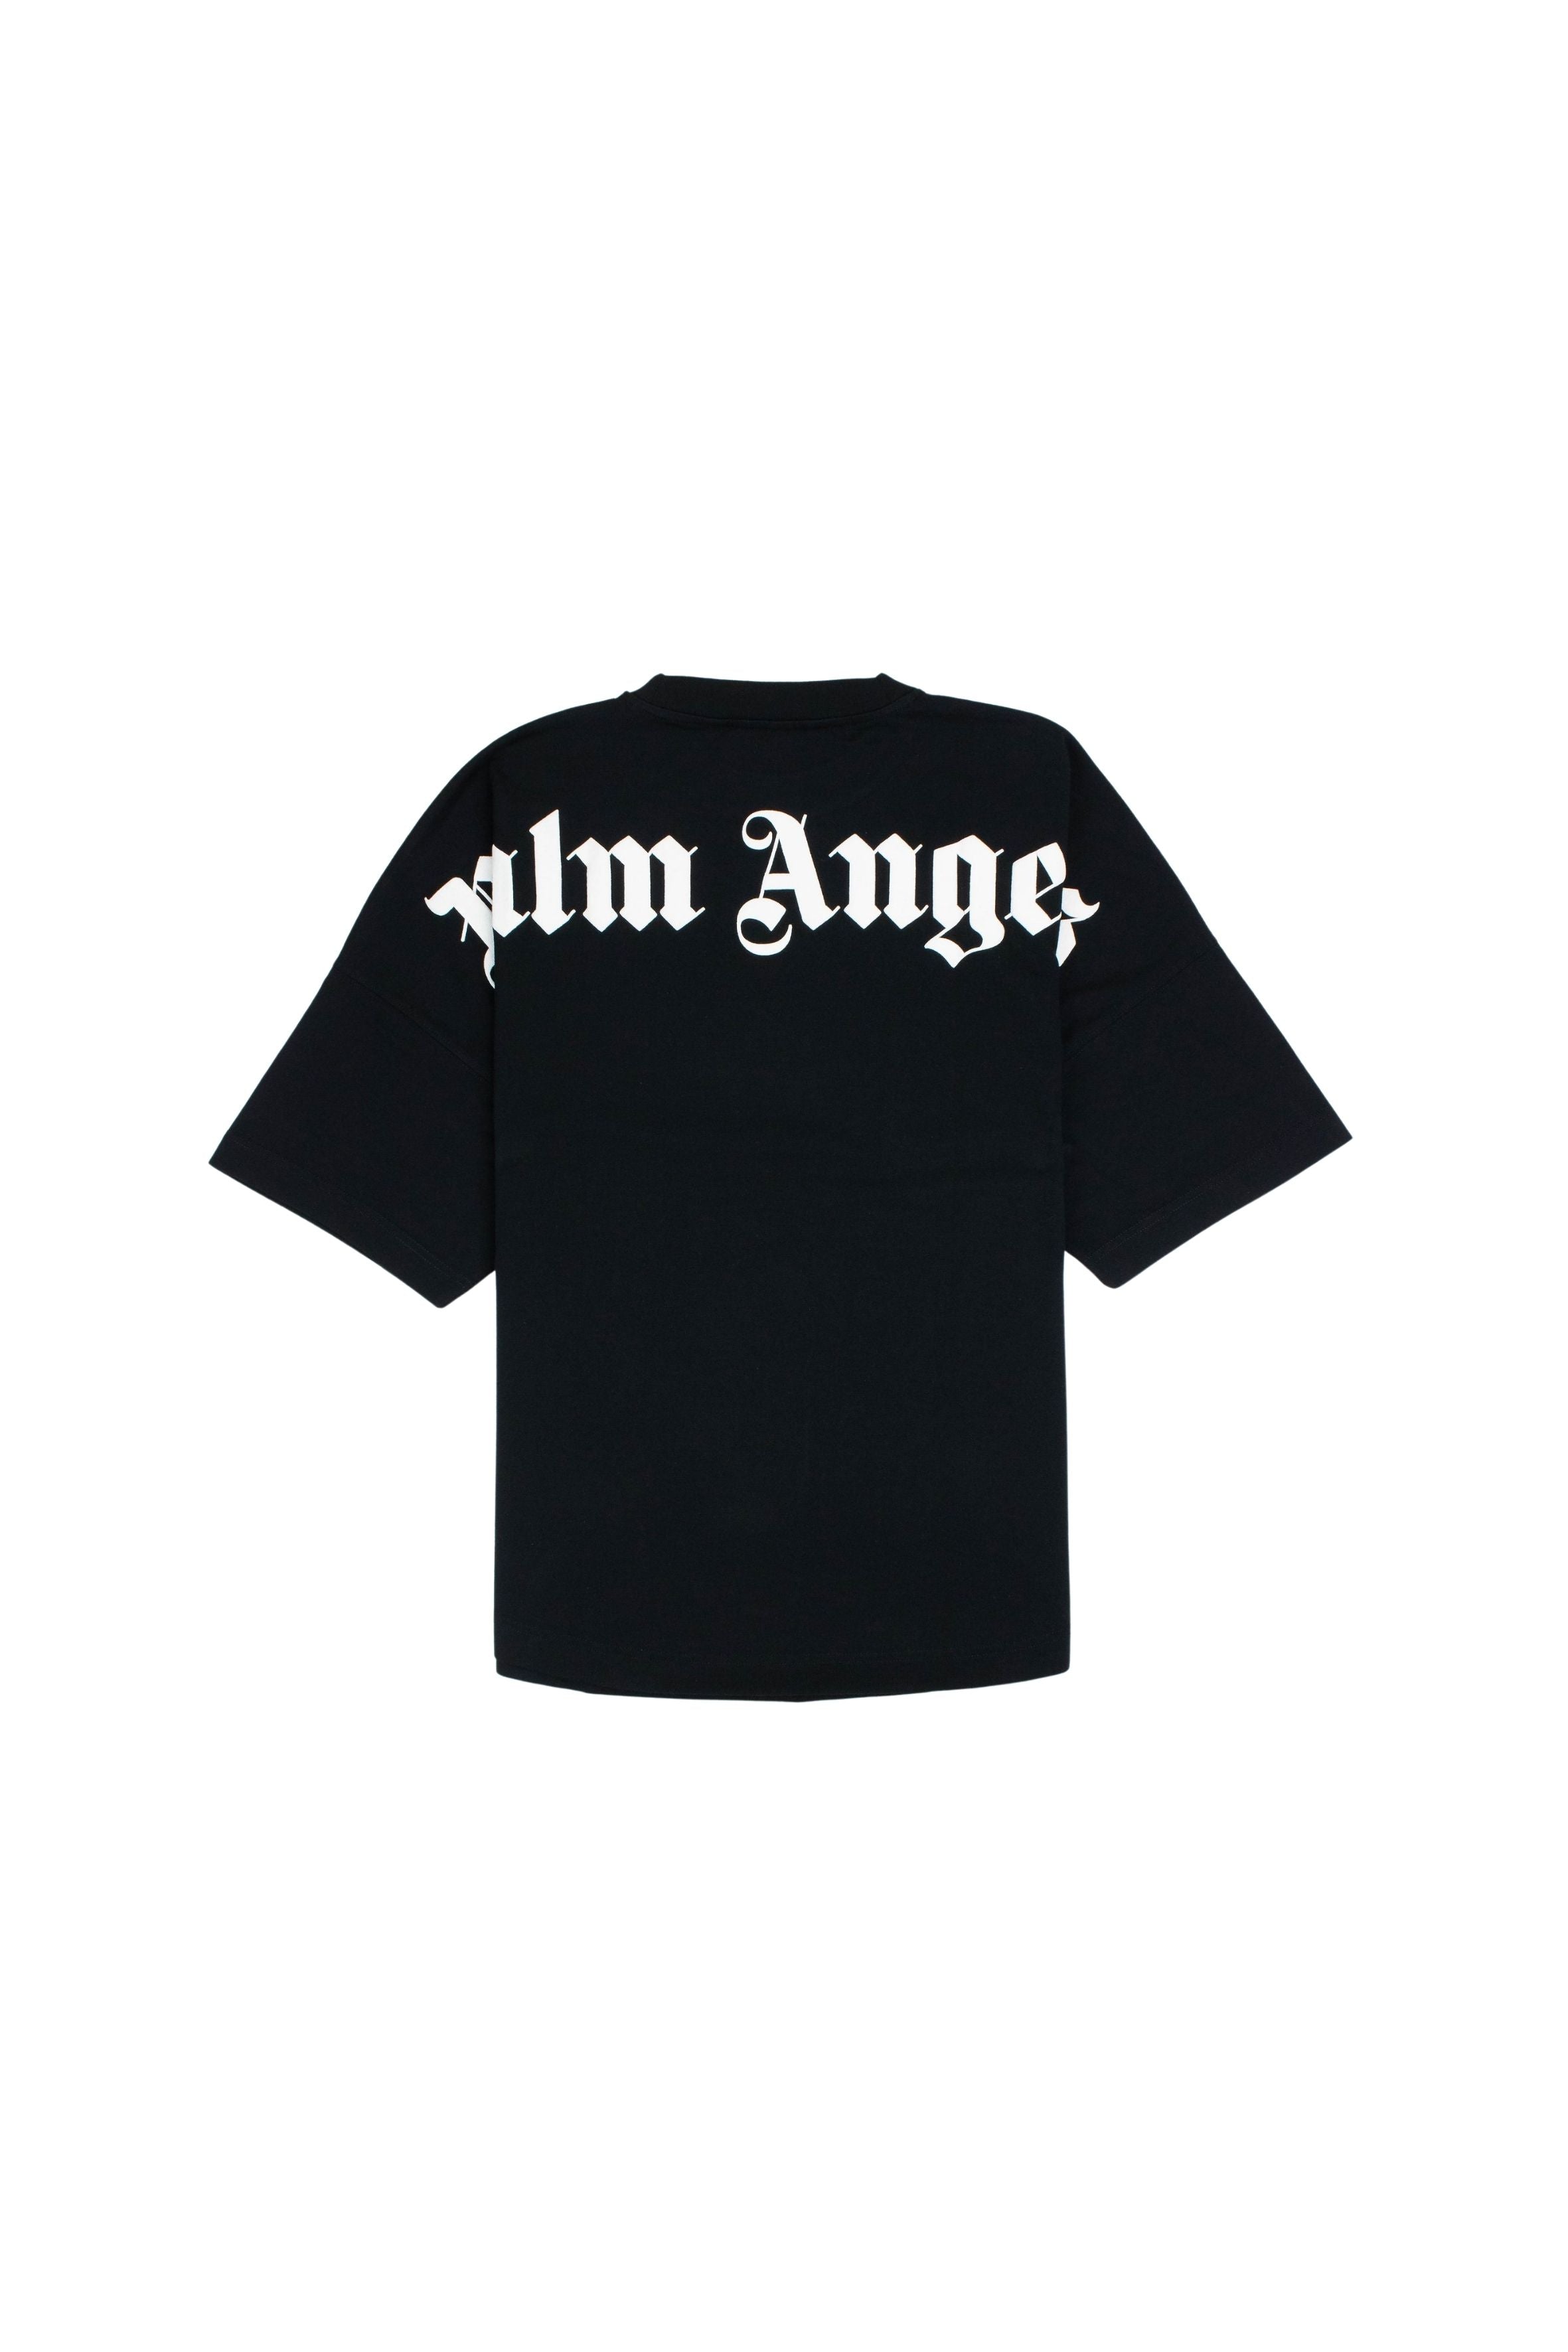 Palm Angels Logo Print T-shirt (Brand new with tags)